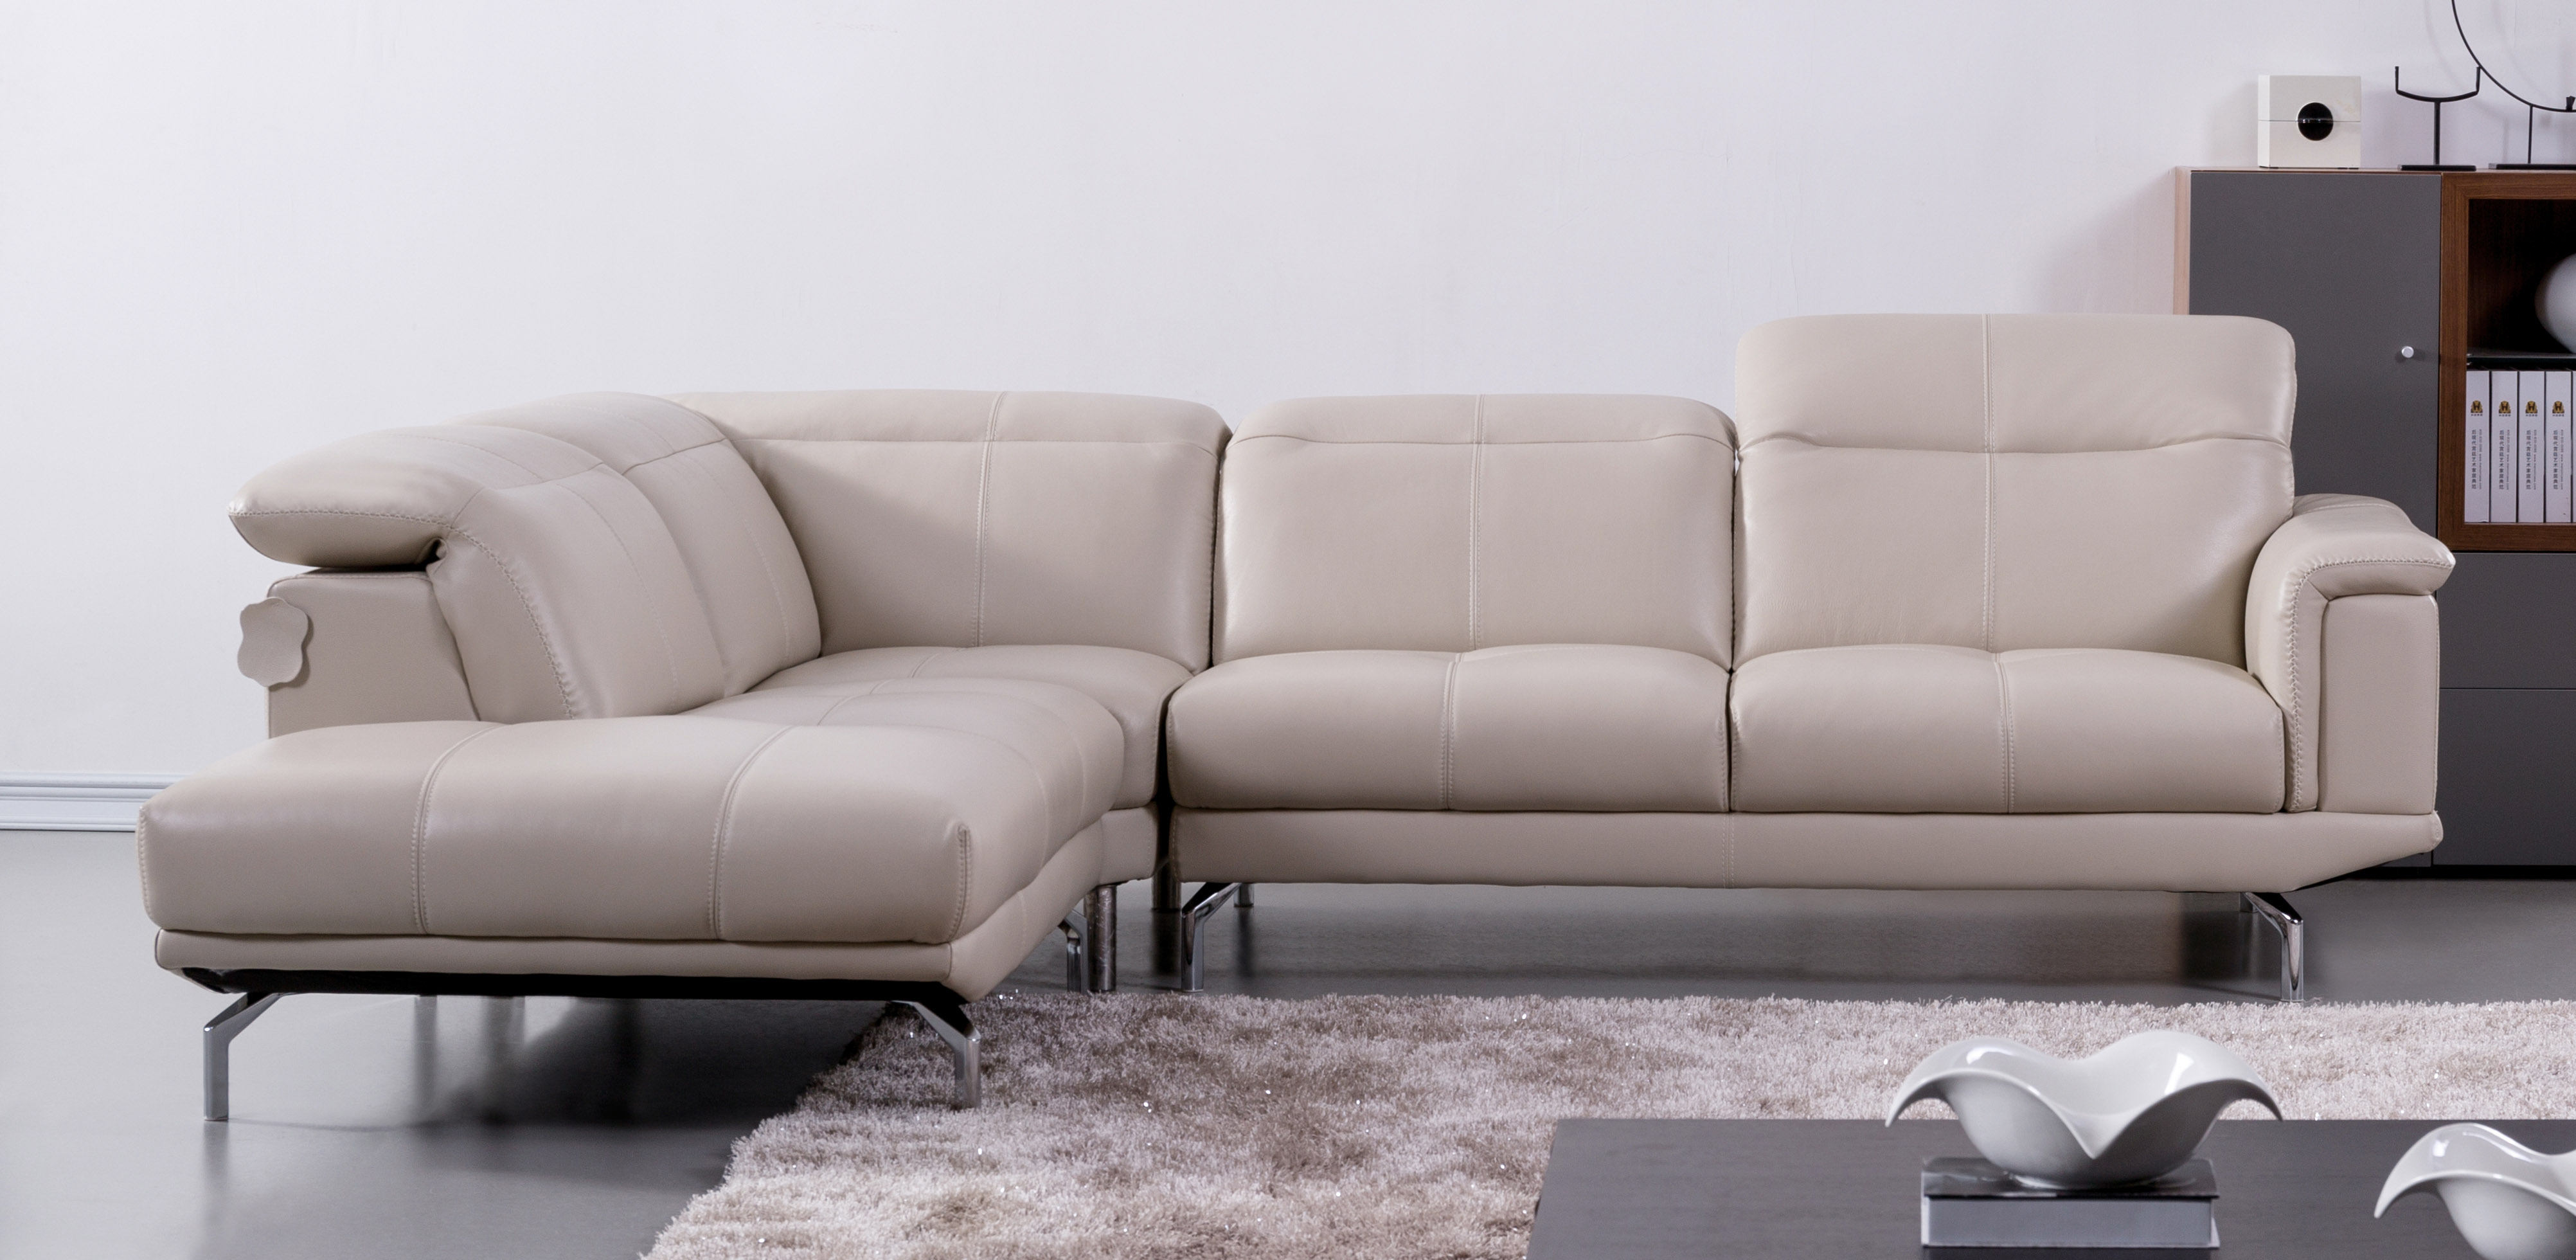 beige colored leather sectional sofa